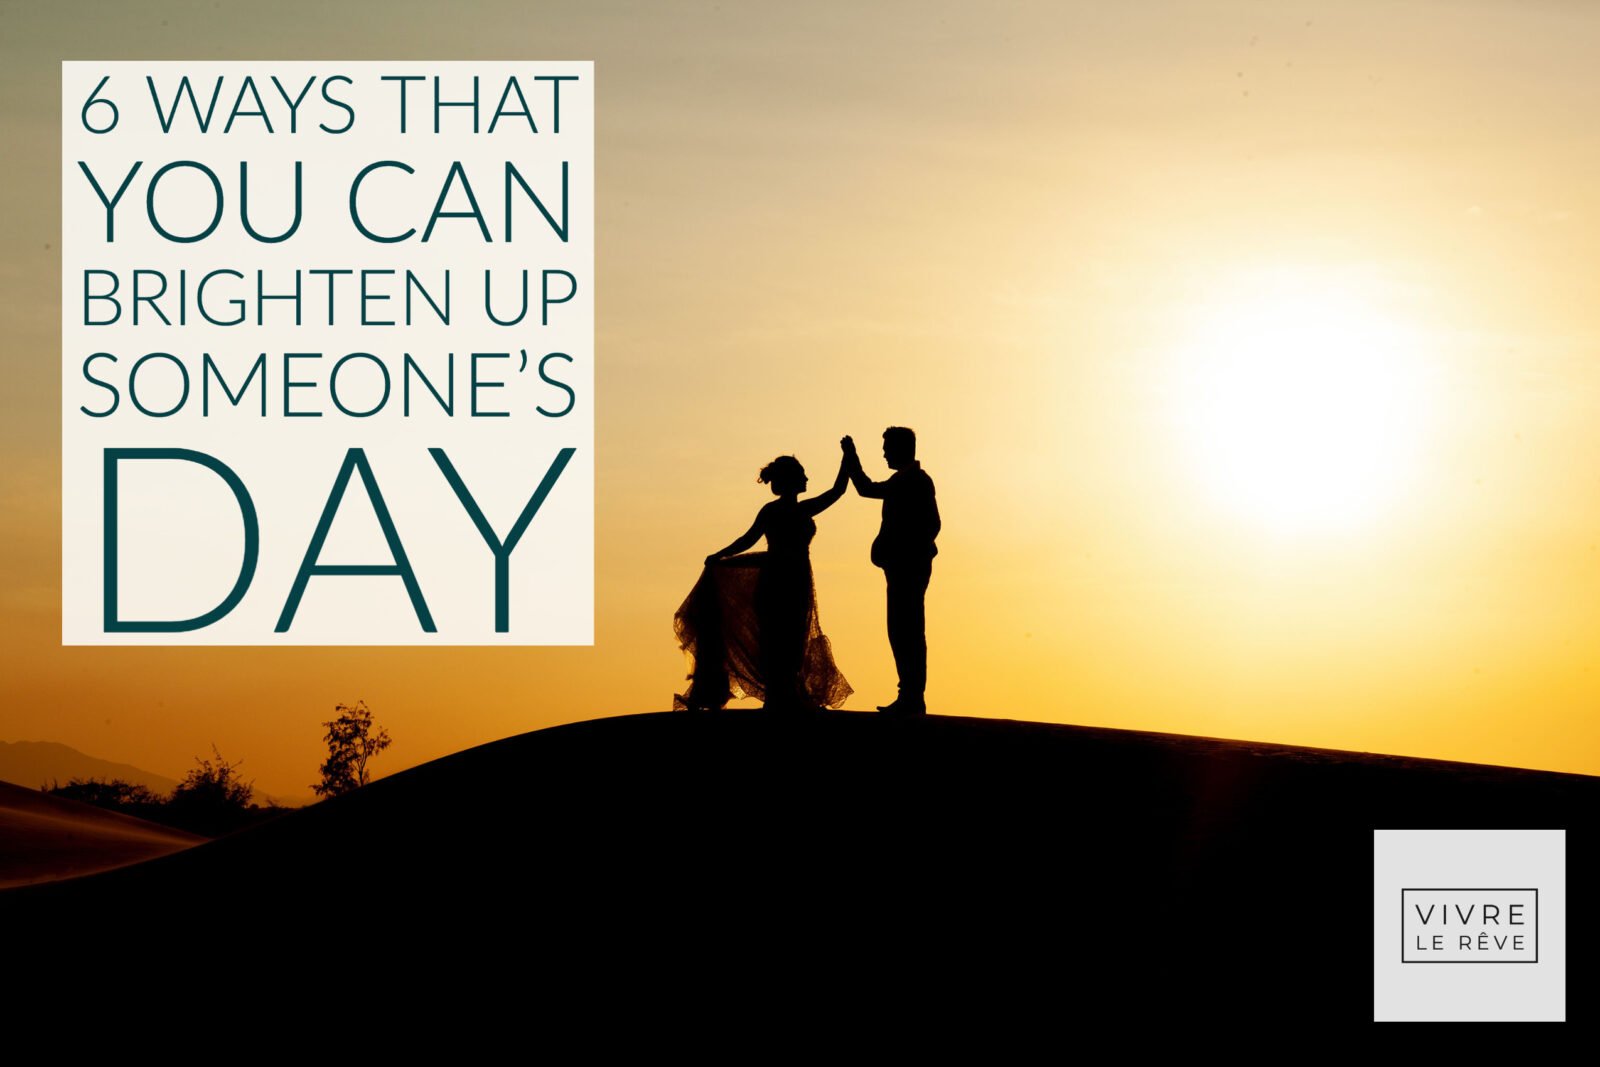 6 Ways That You Can Brighten Up Someone’s Day